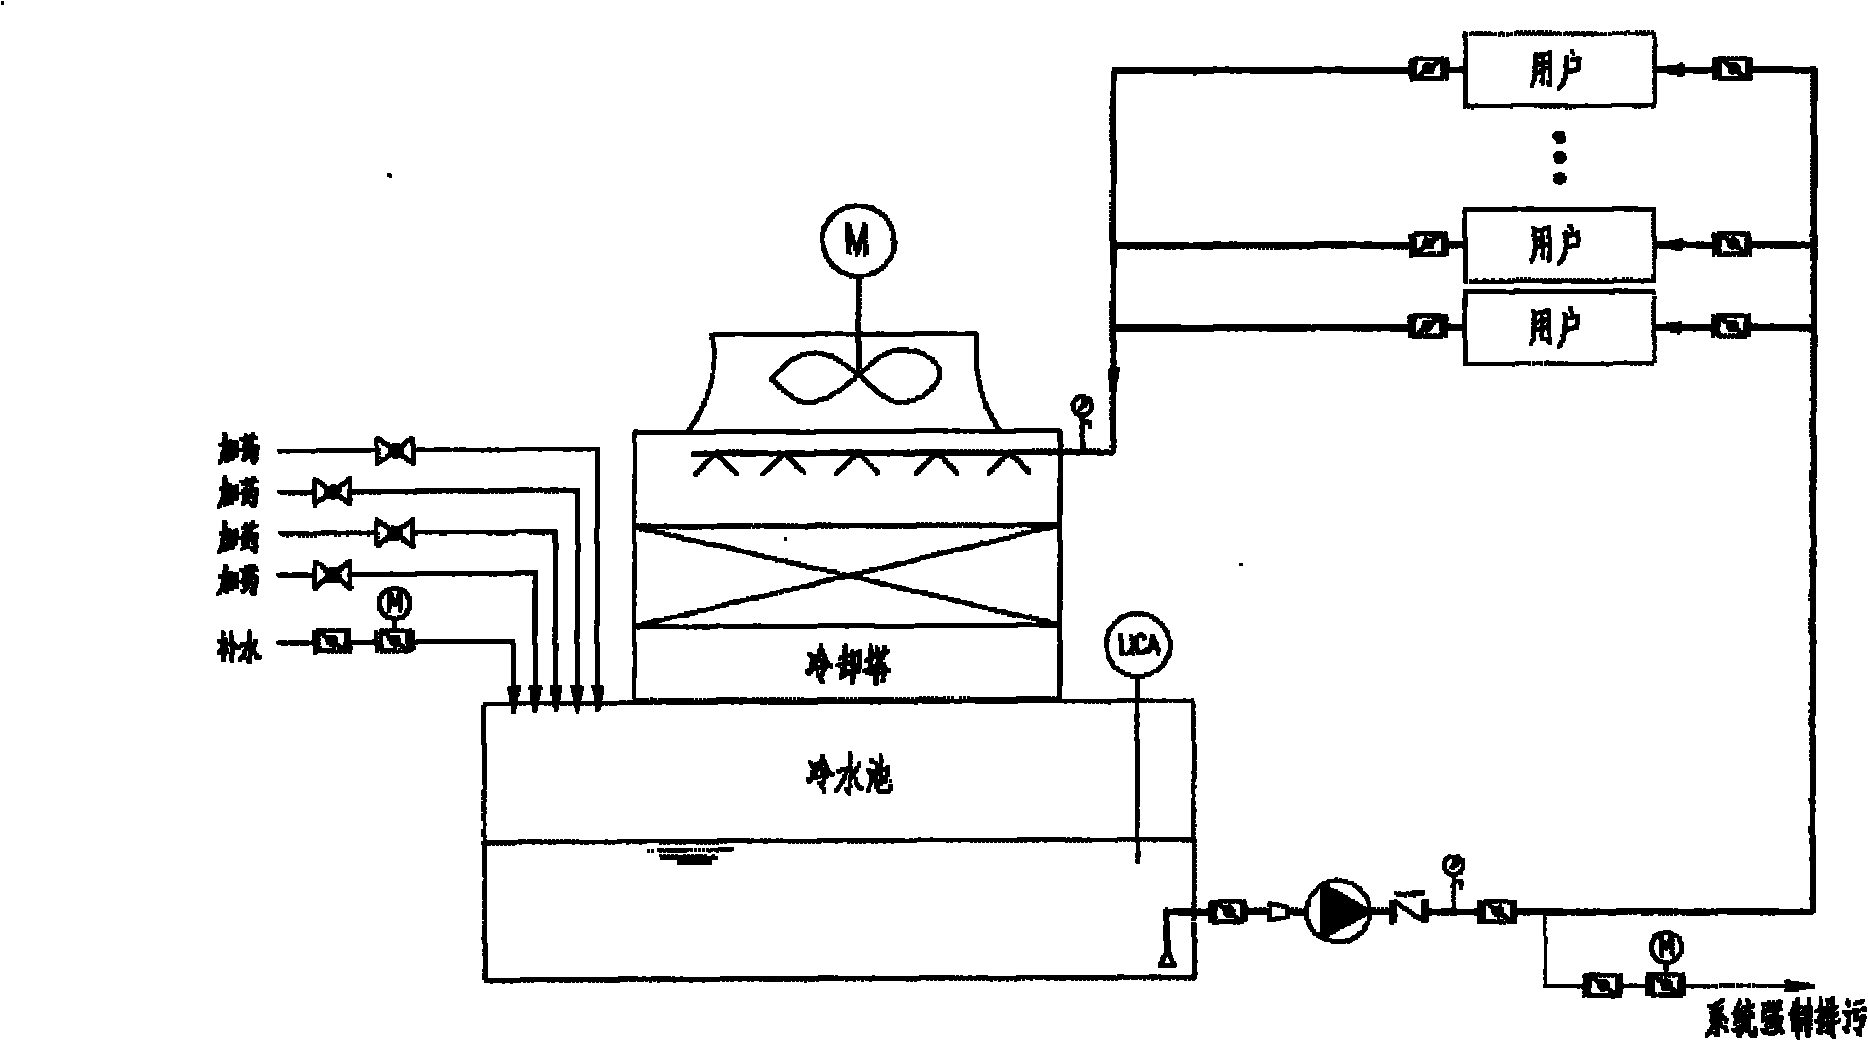 Cooling circulating water electrochemistry water quality stabilization treatment system